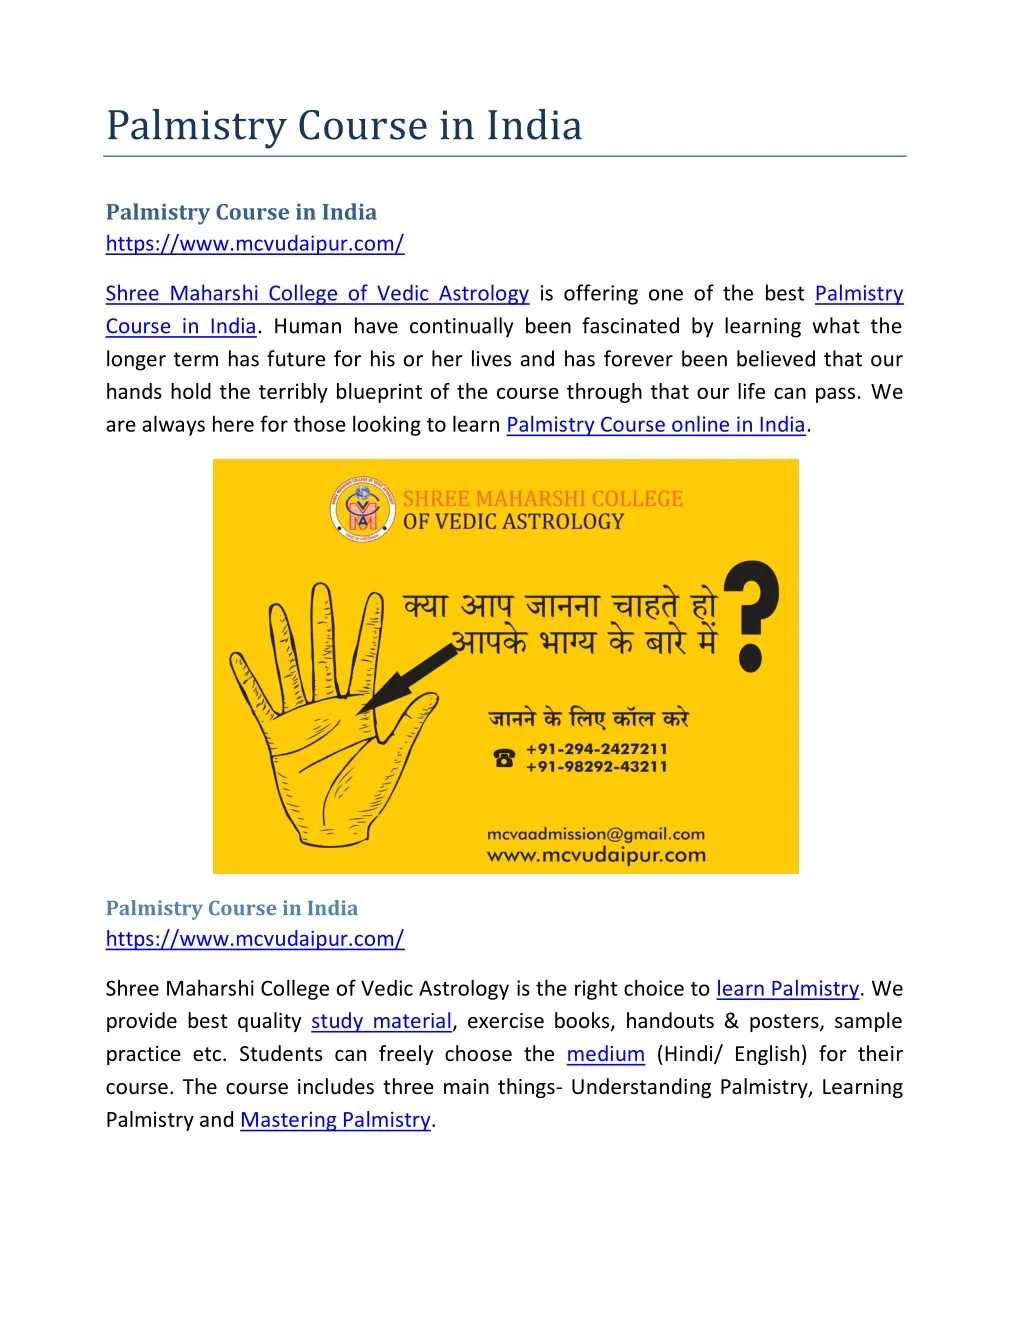 palmistry course in india